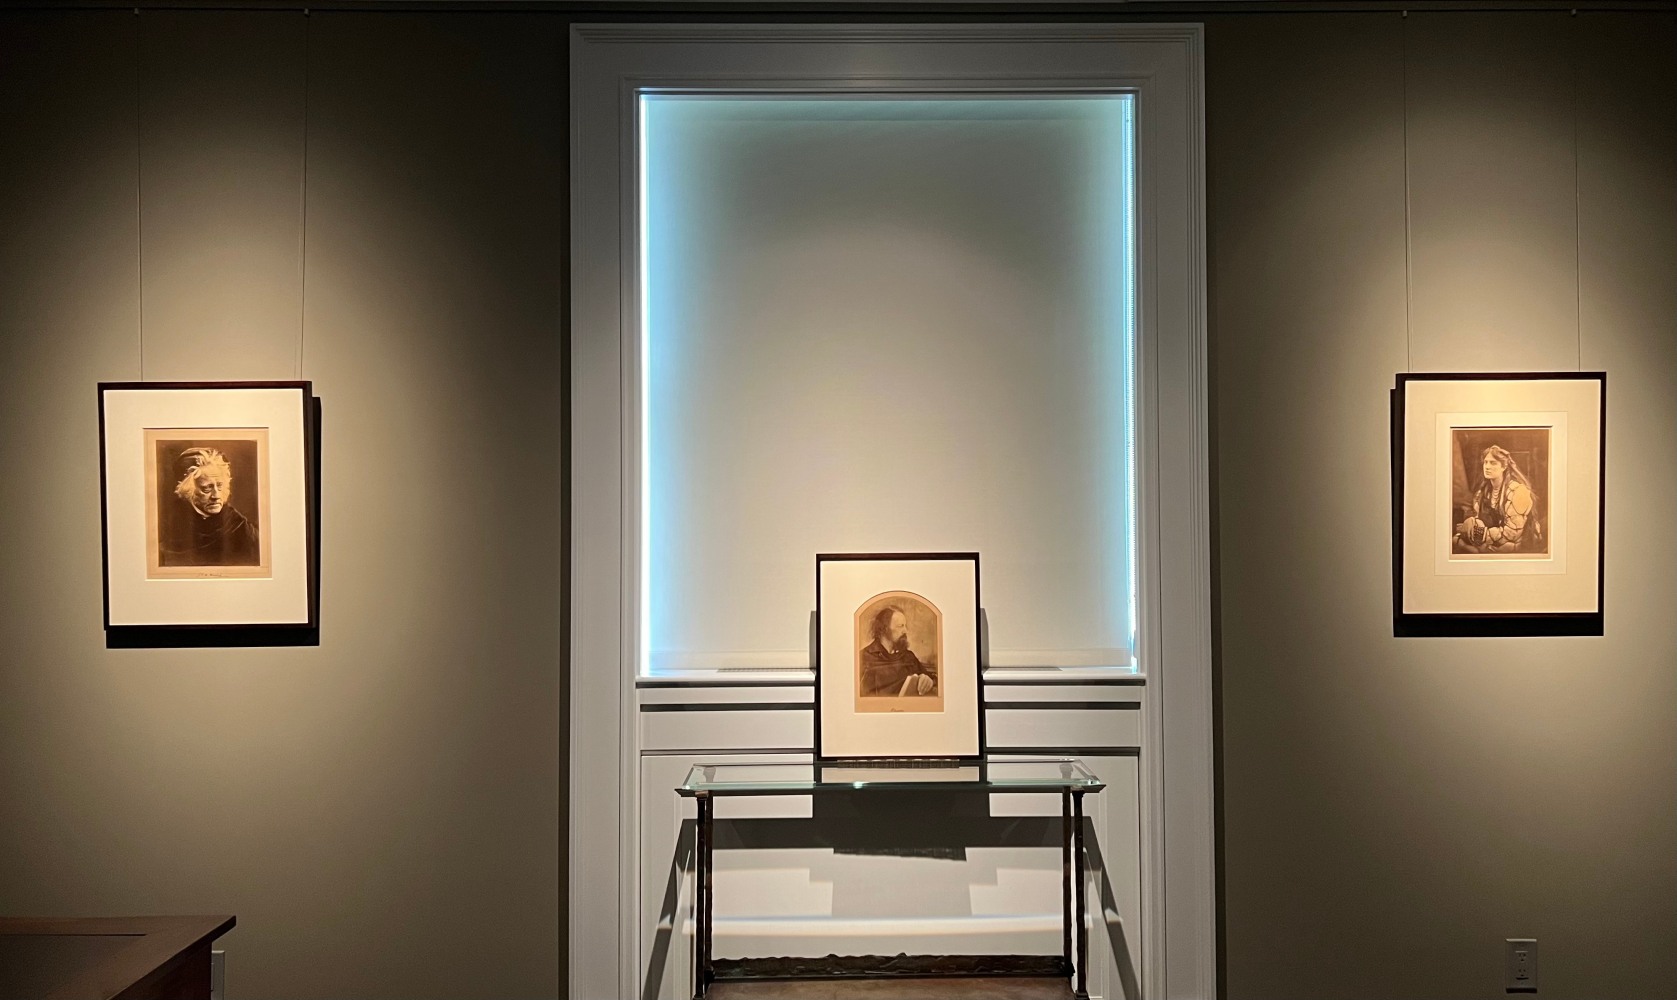 Second installation view of exhibition, 3 portraits by Julia Margaret Cameron of Herschel, Tennyson and Marie Spartali